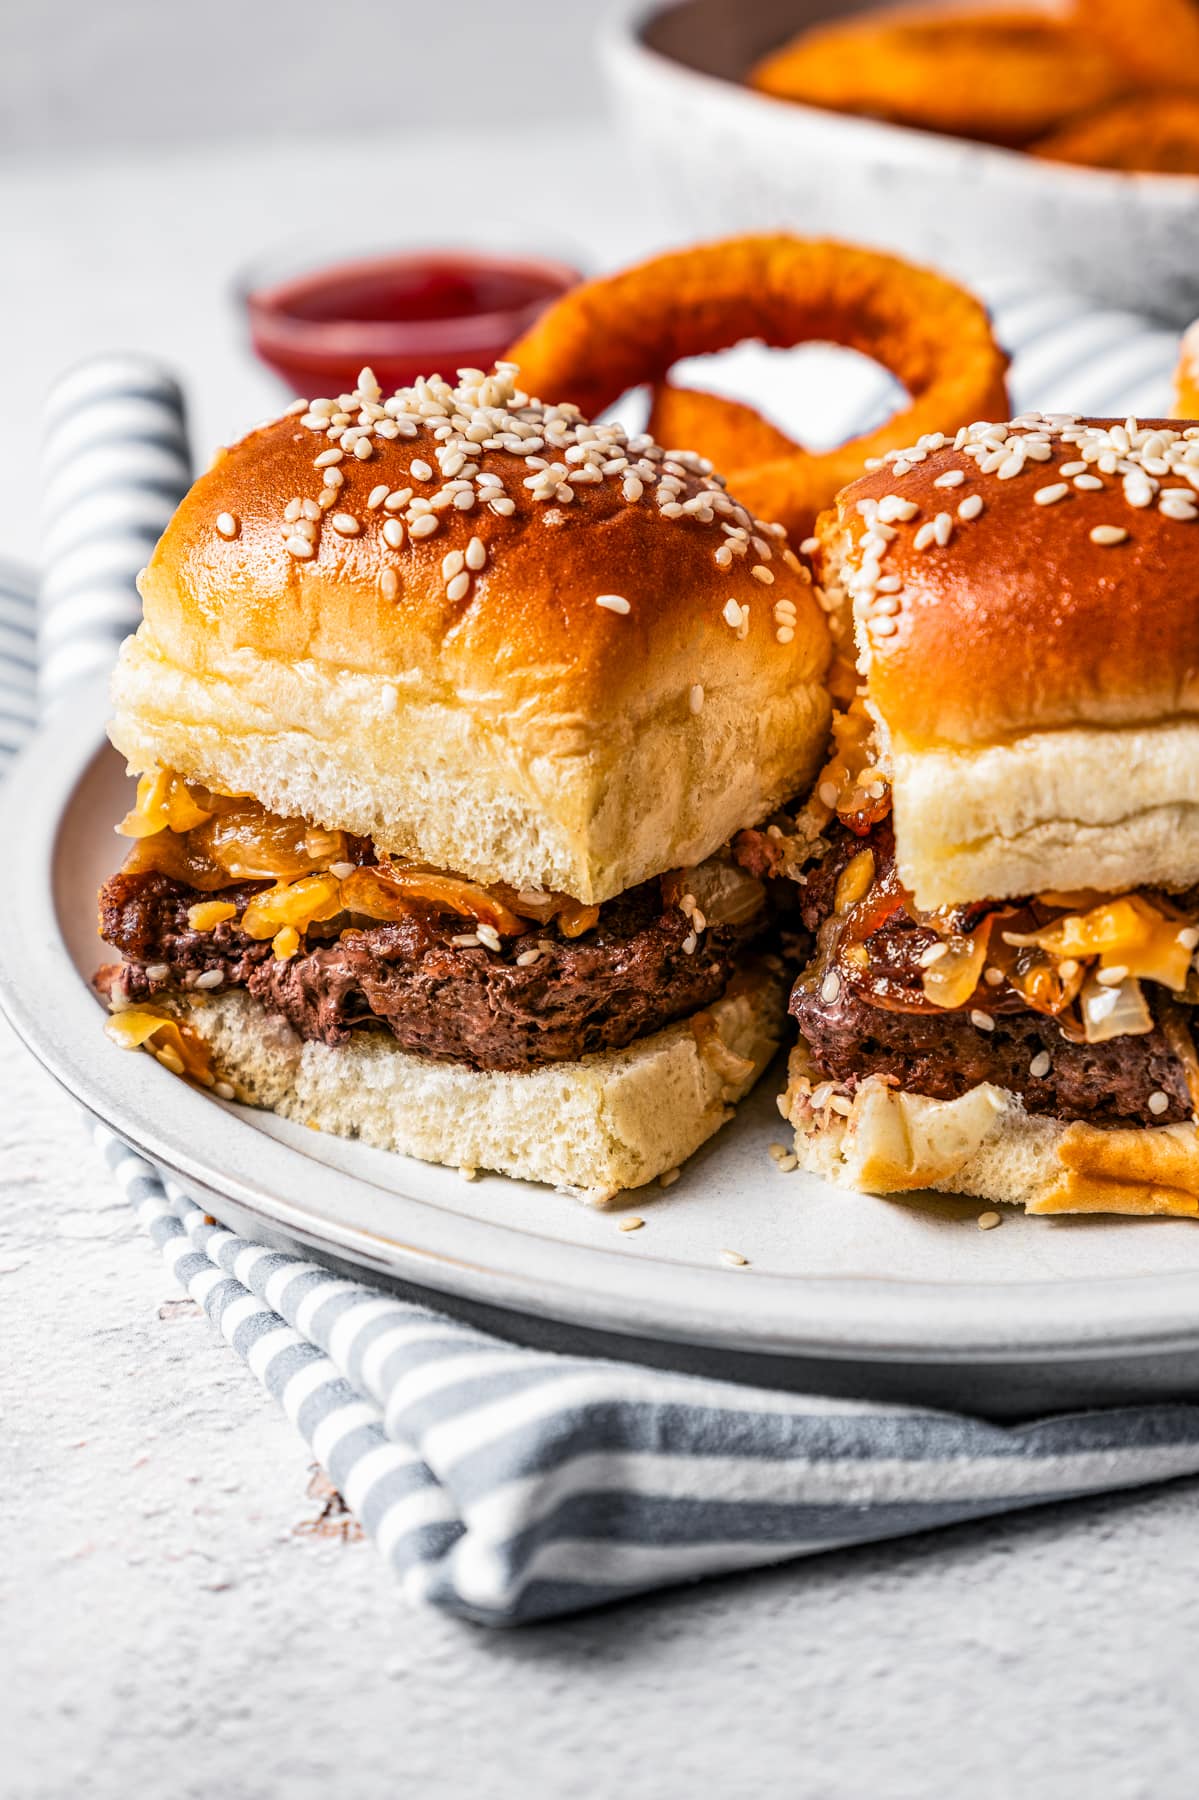 Sliders served on a plate that's set on top of a kitchen towel.